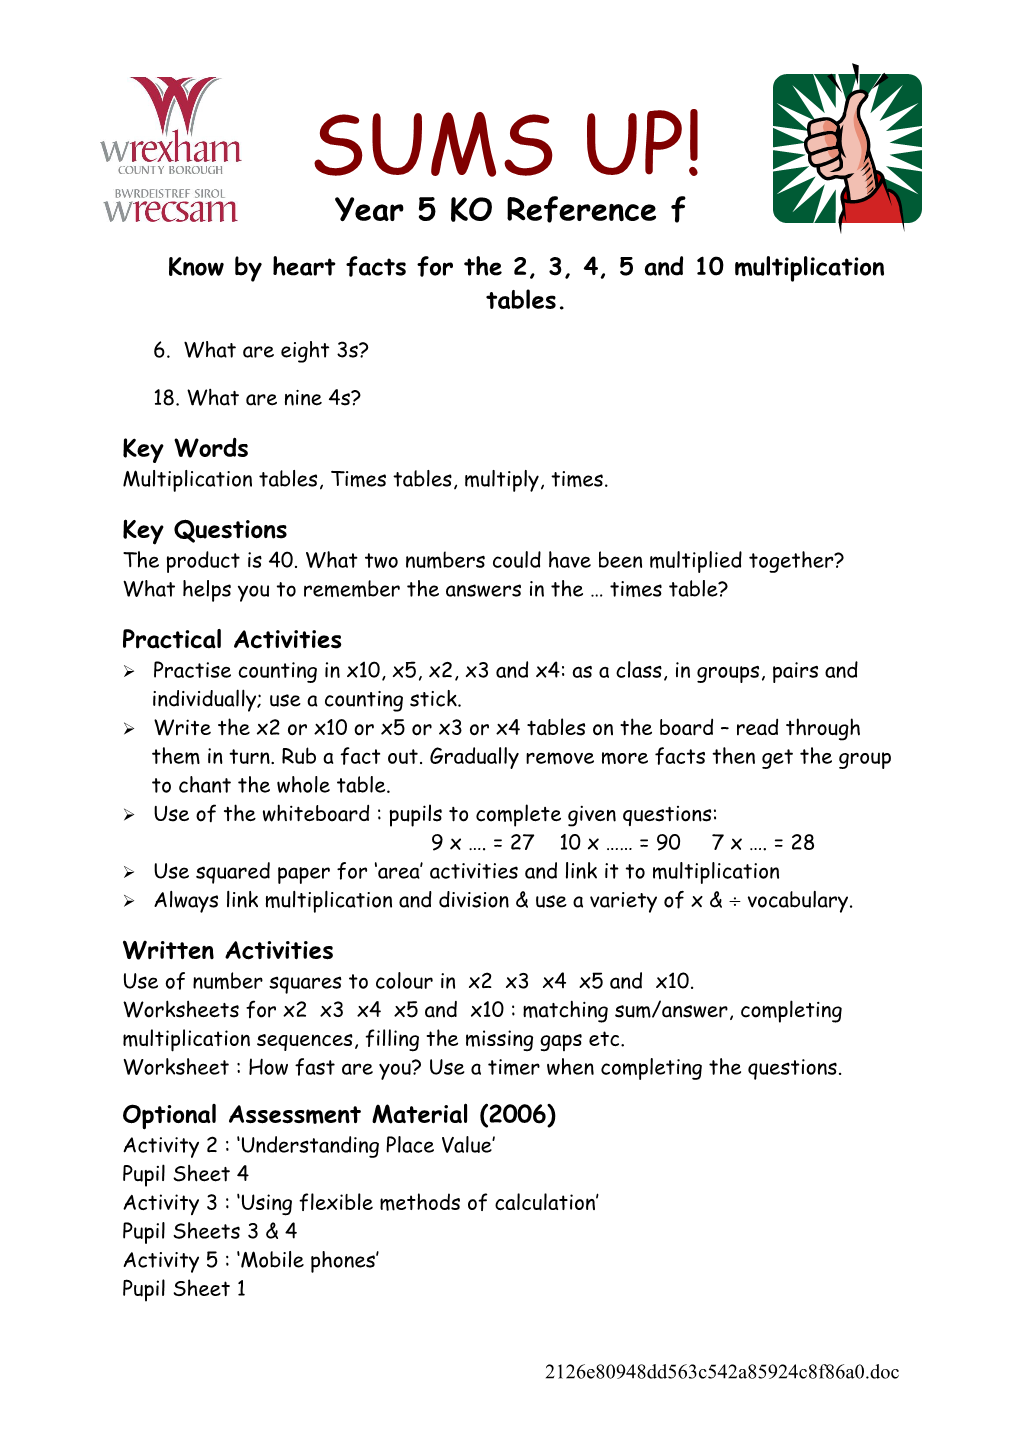 Know by Heart Facts for the 2, 3, 4, 5 and 10 Multiplication Tables